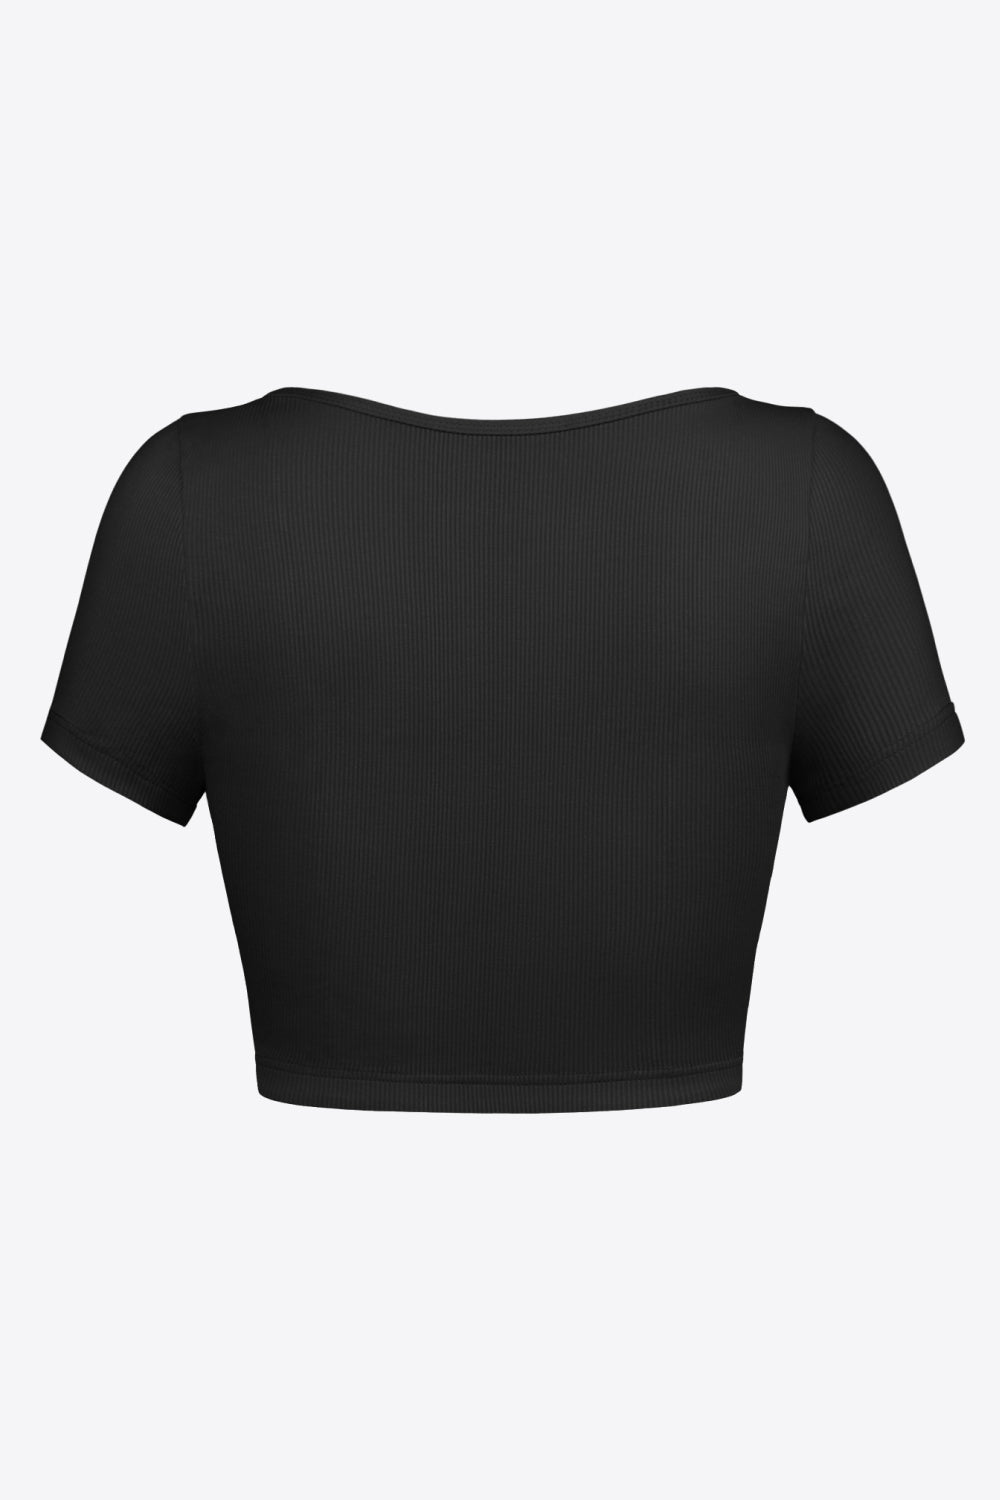 Square Neck Ribbed Crop Top - Women’s Clothing & Accessories - Shirts & Tops - 3 - 2024